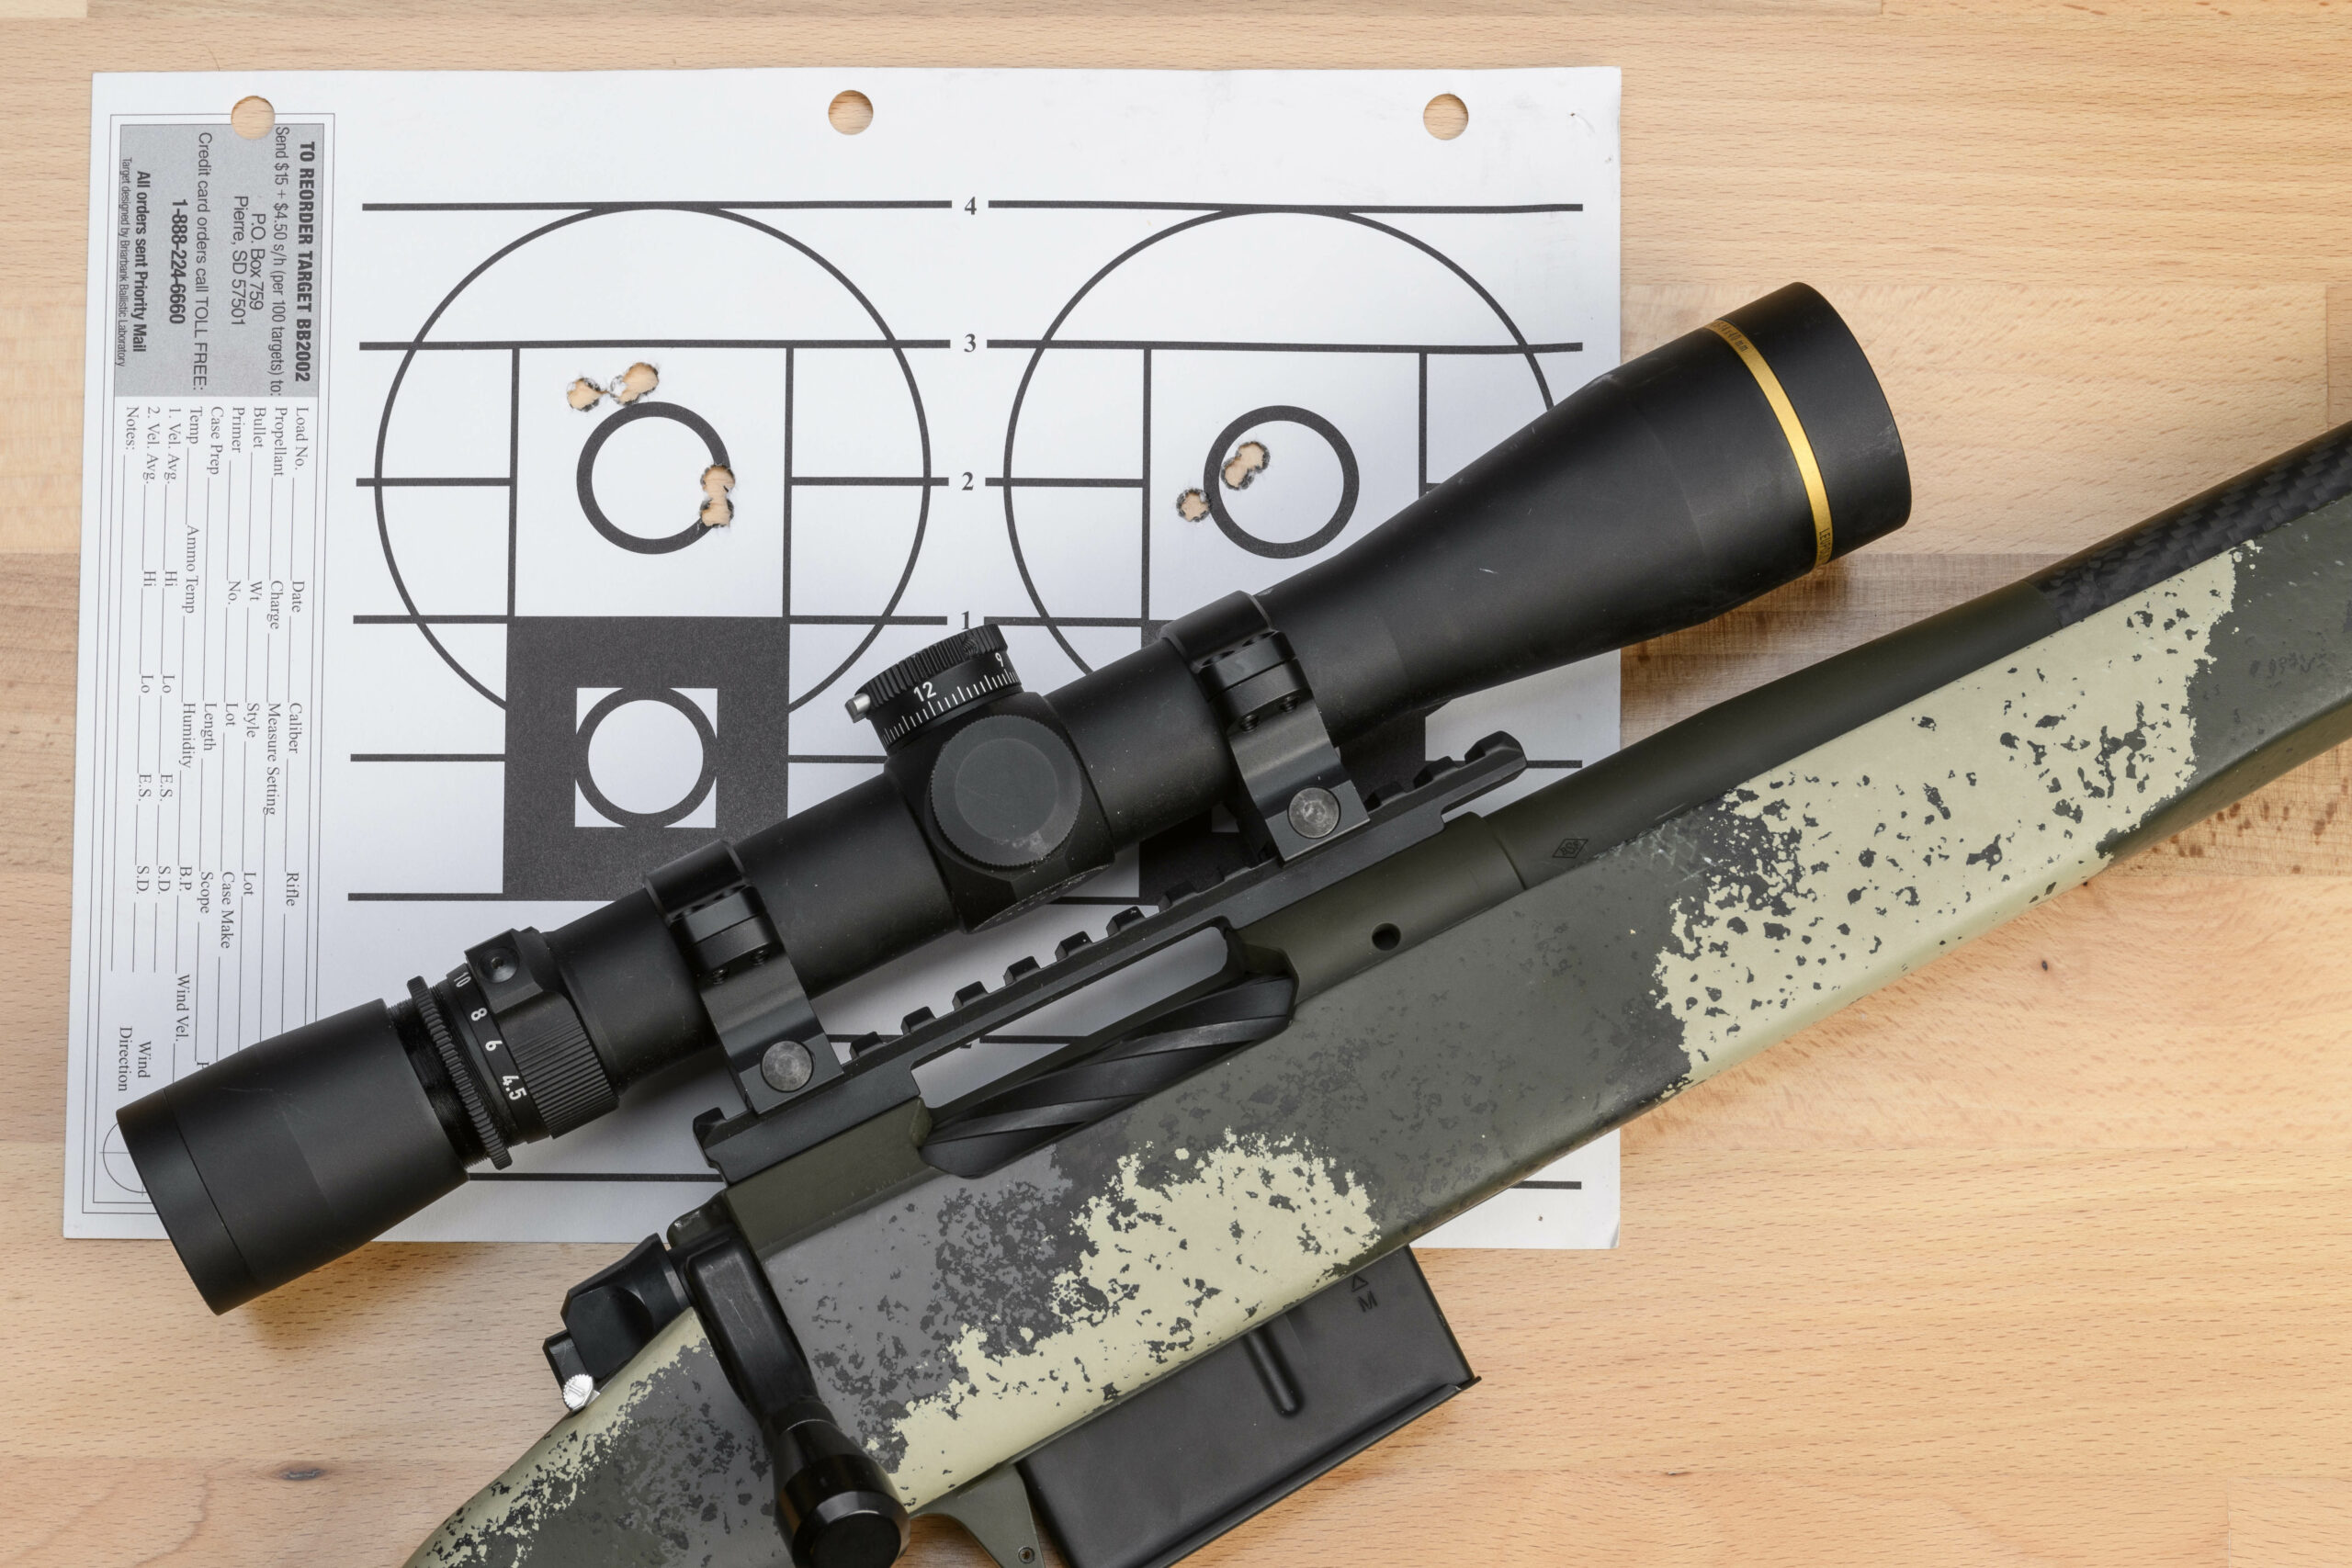 A camo-stocked bolt-action rifle, topped with a black scope, lying on top of a paper target with two zeroing groups.